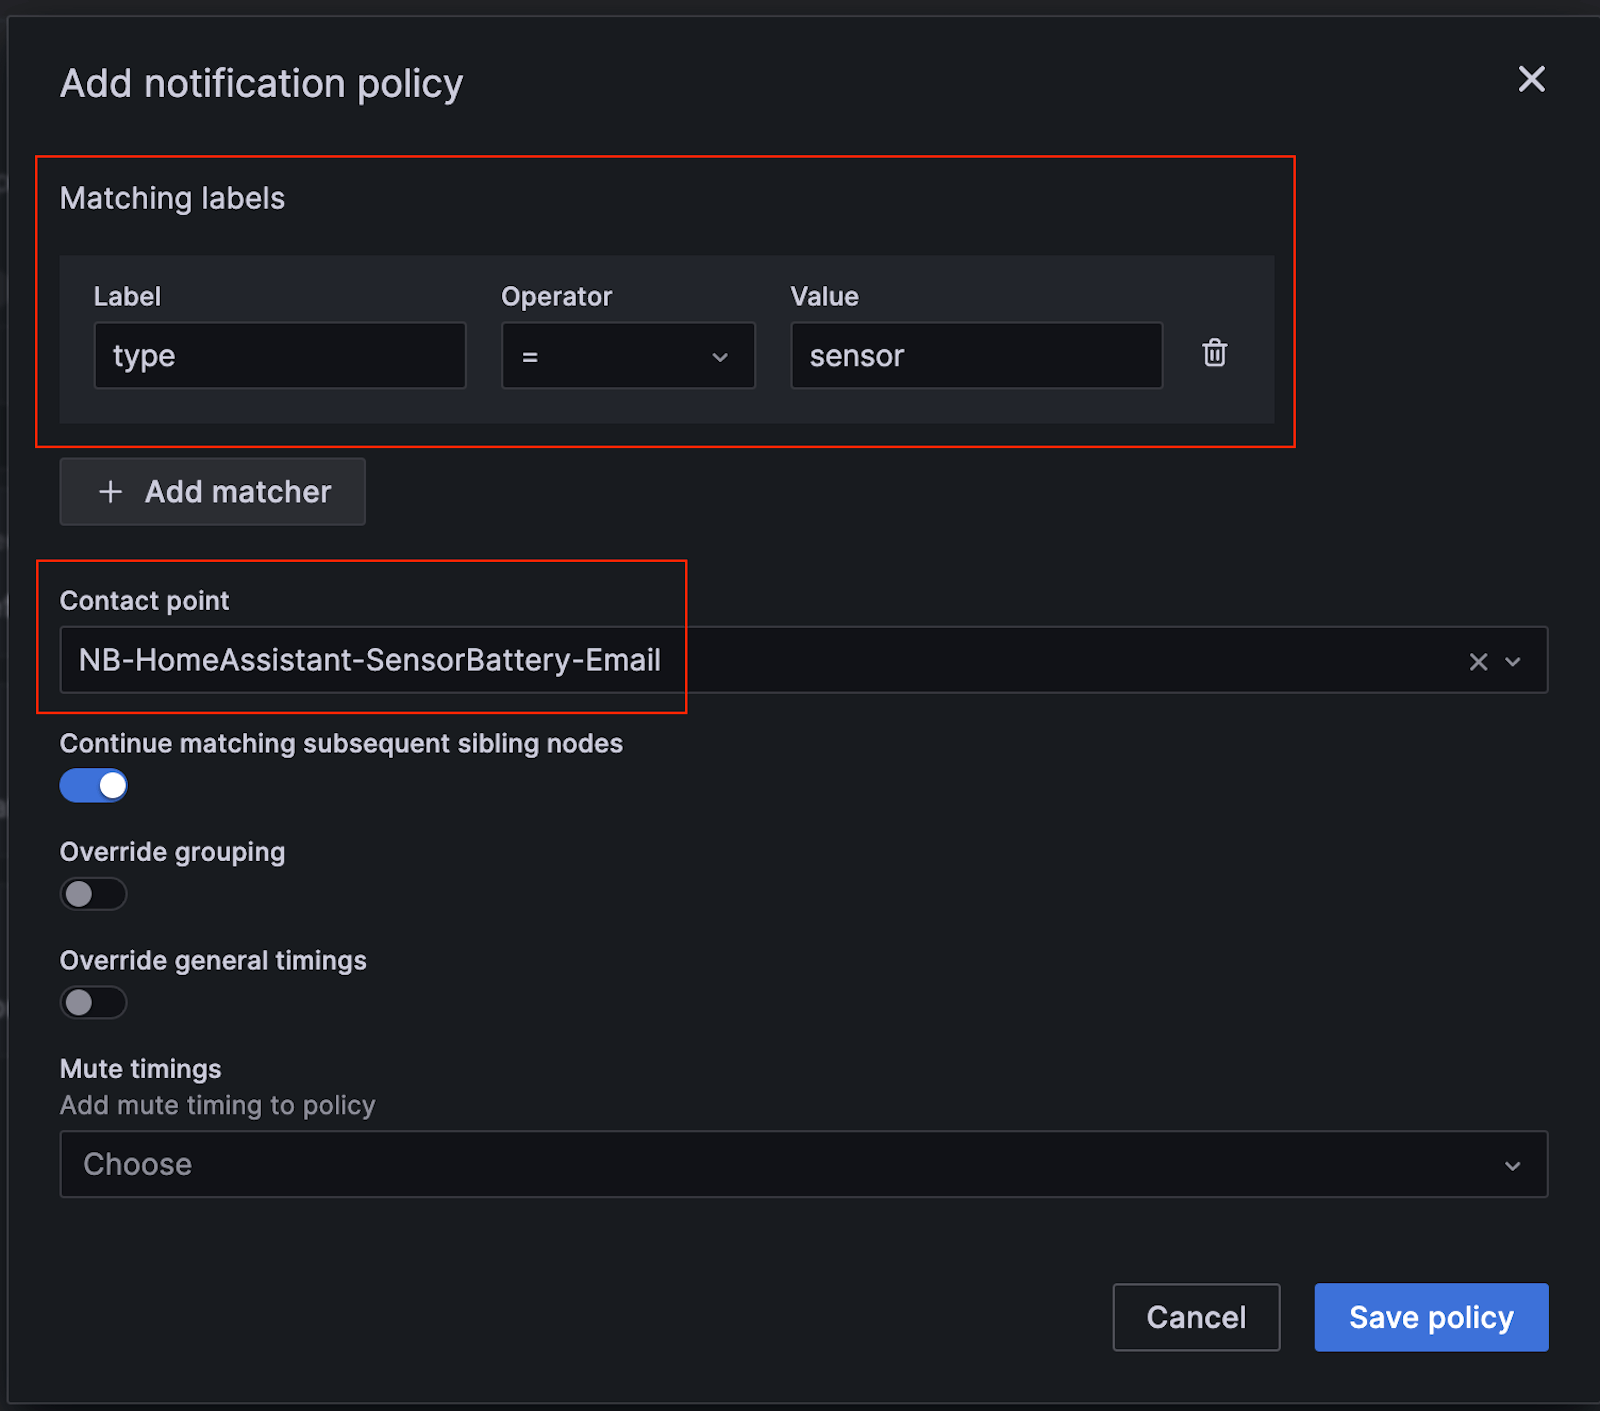 A screenshot of the setting page for adding notification policies.